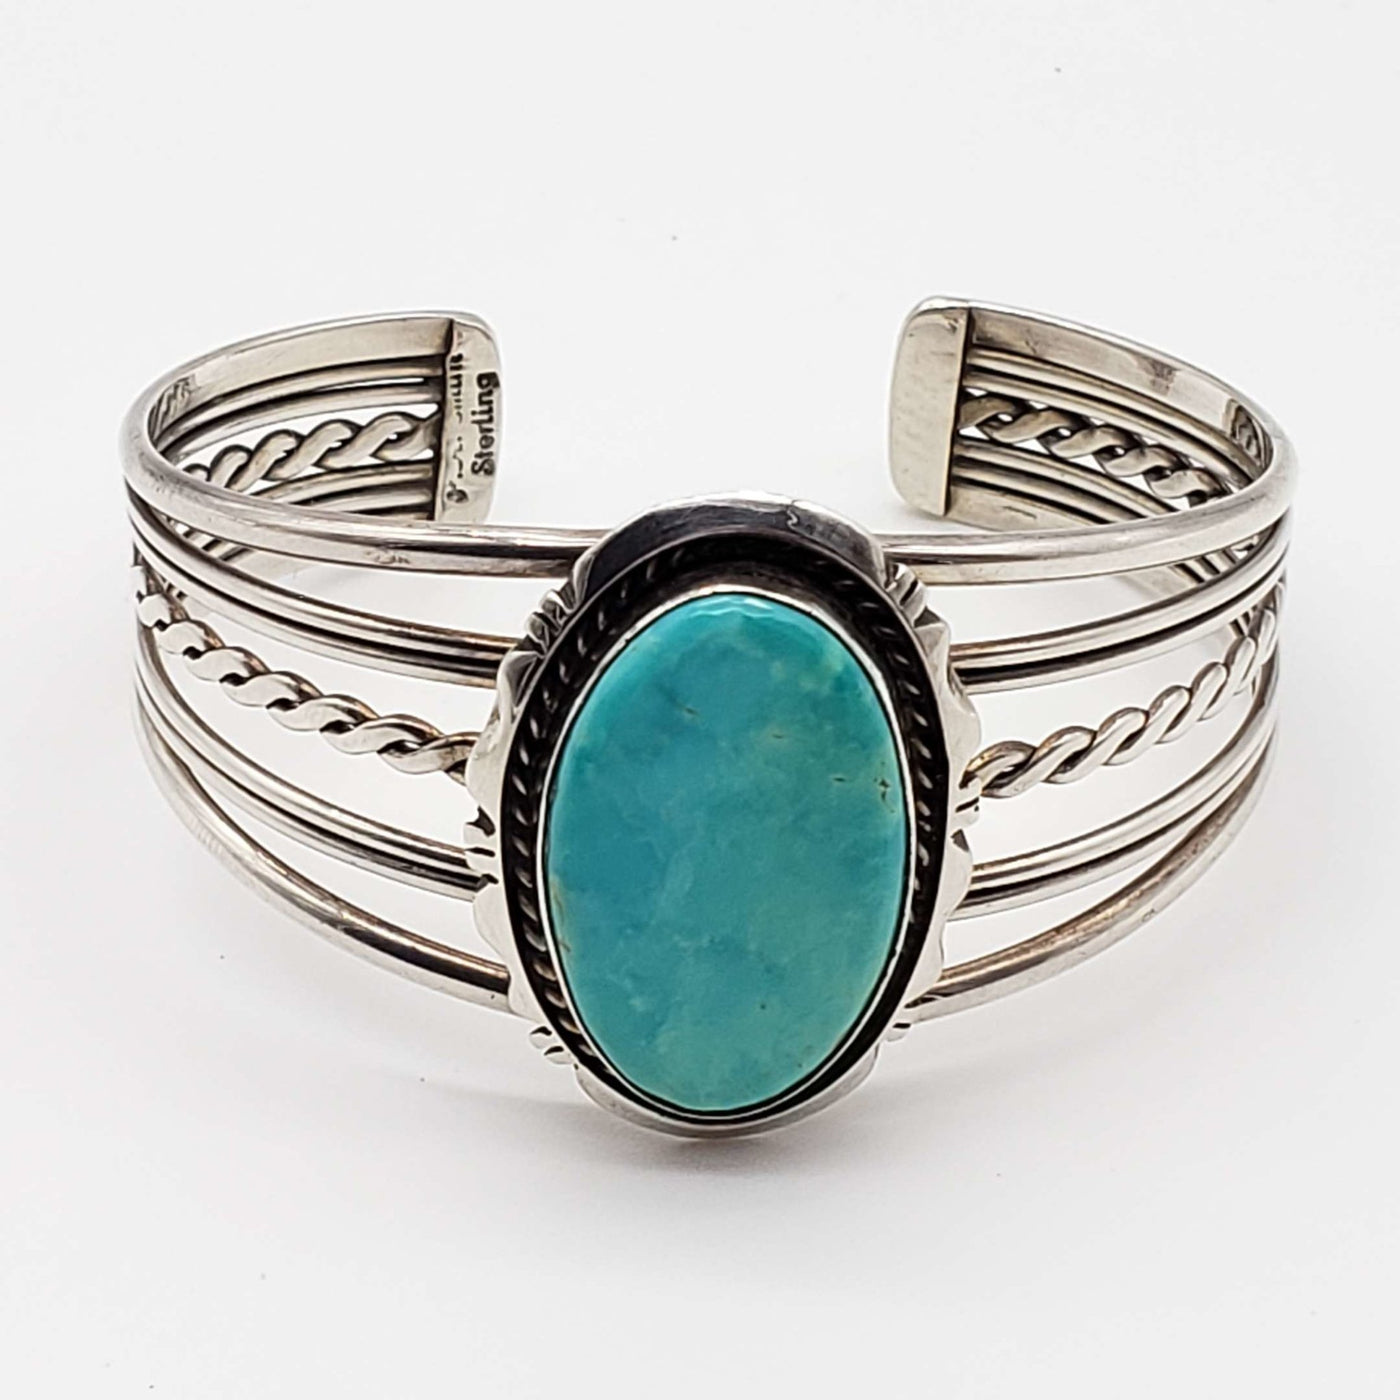 Bangle Sterling Silver with Turquoise Stone - Luxury Cheaper